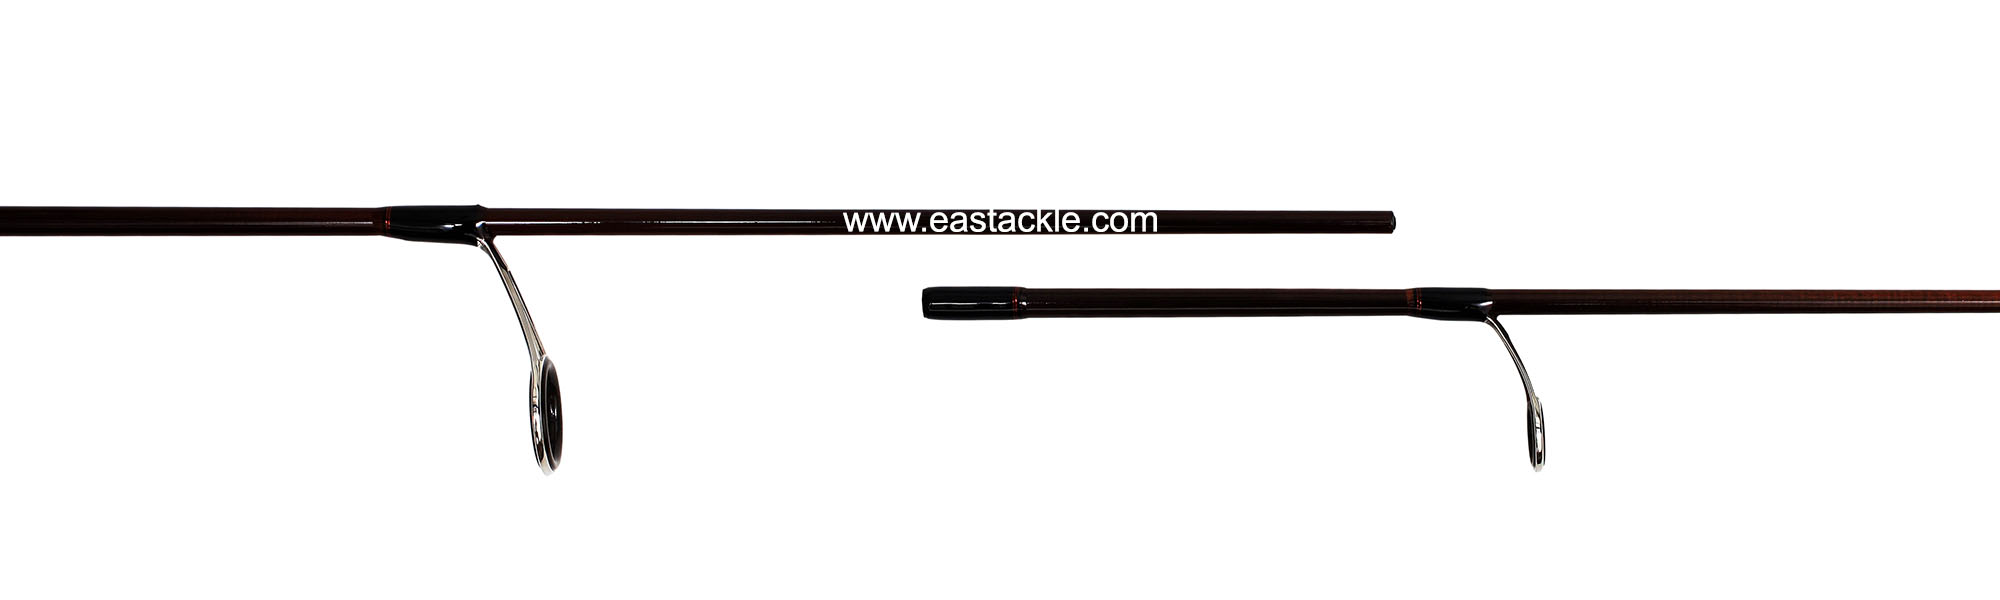 Storm - Discovery - DVS662M - Spinning Rod - Joint Section (Side View) | Eastackle